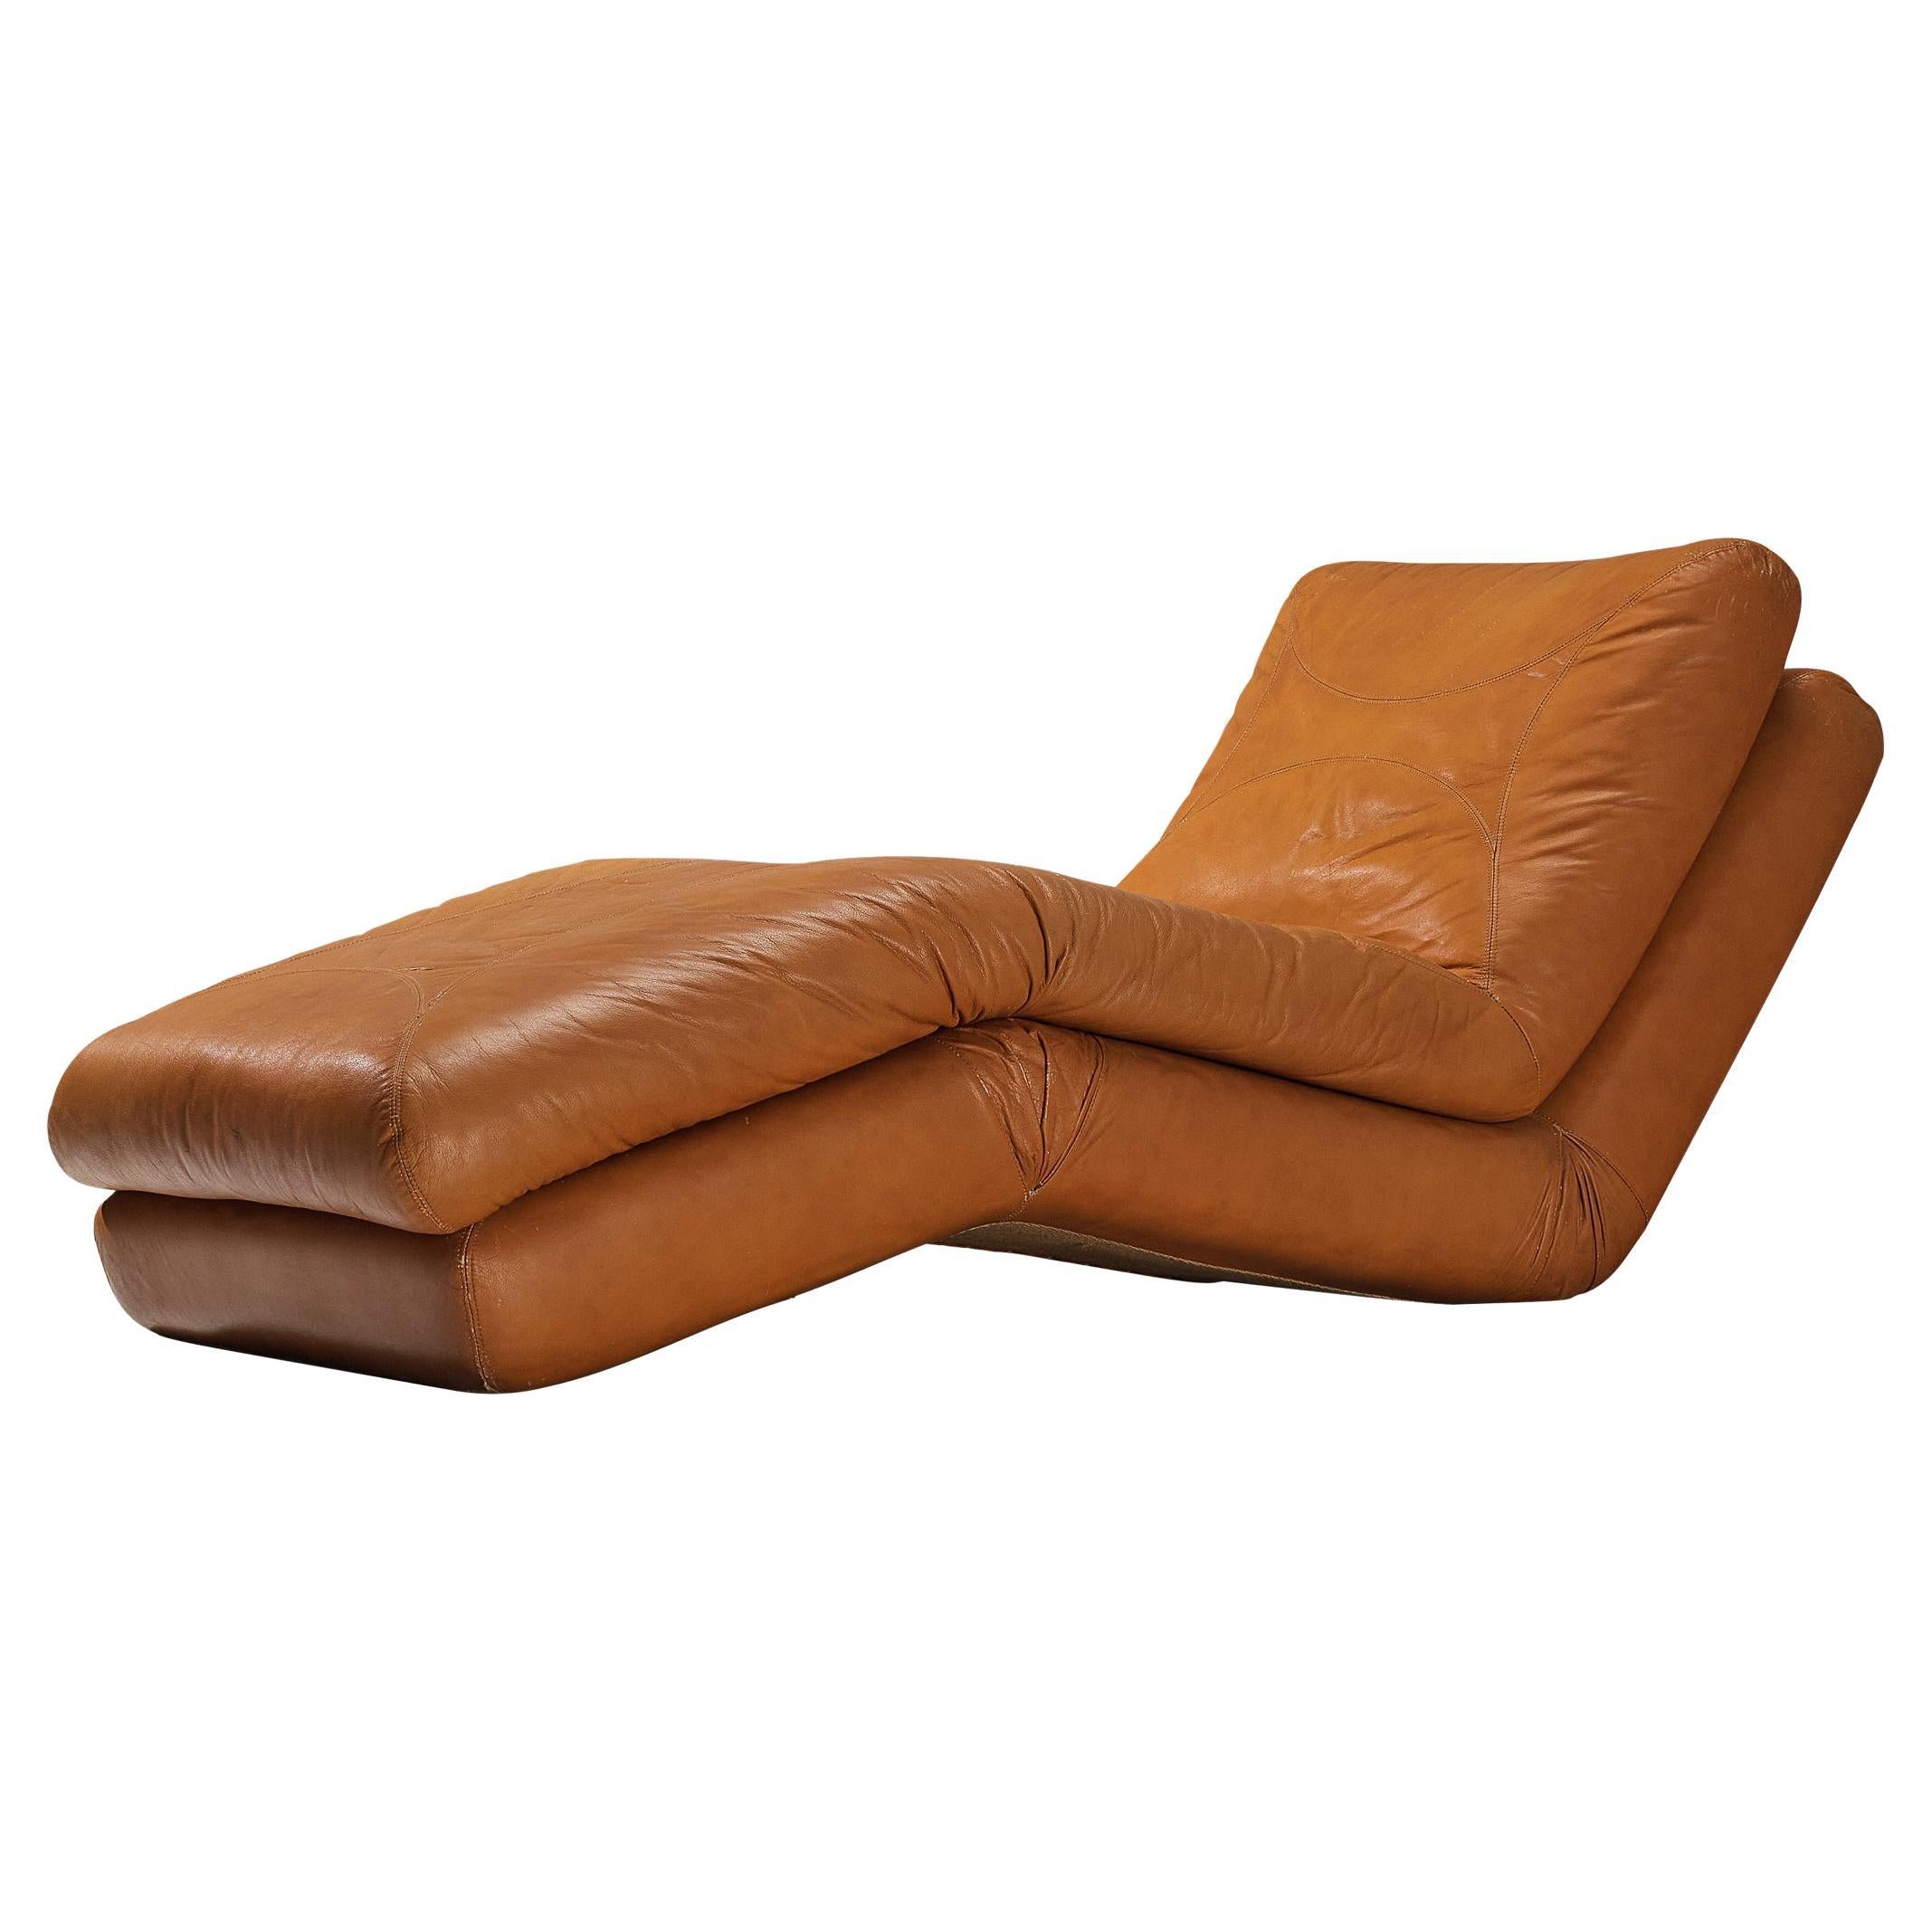 Alessandro Becchi for Giovannetti 'Papessa' Chaise Longue in Leather